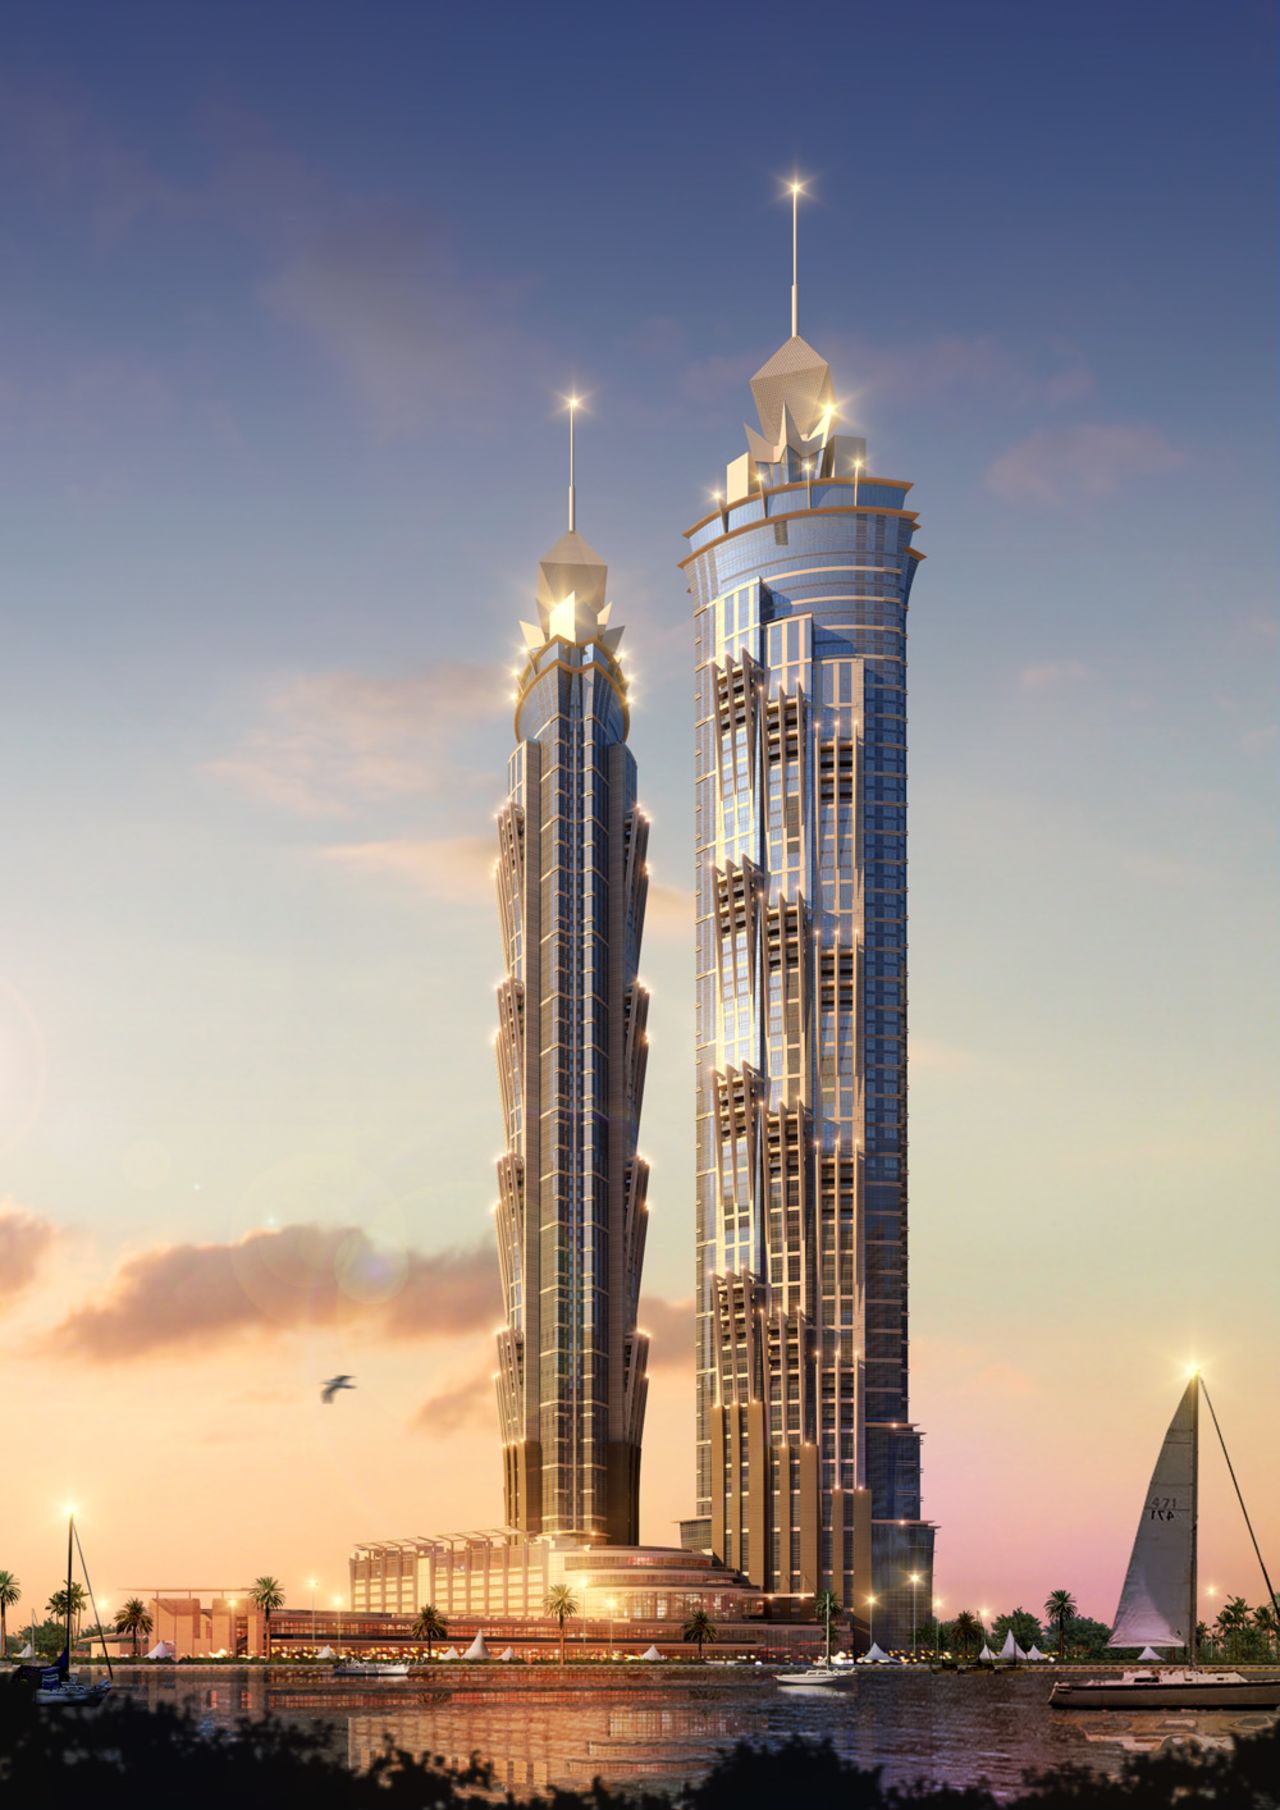 An illustration of the JW Marriott Marquis Dubai, due to open in 2012. <br /><br />When completed, it will have 1,608-rooms and will be 355 meters tall, making it the tallest dedicated hotel building in the world. 